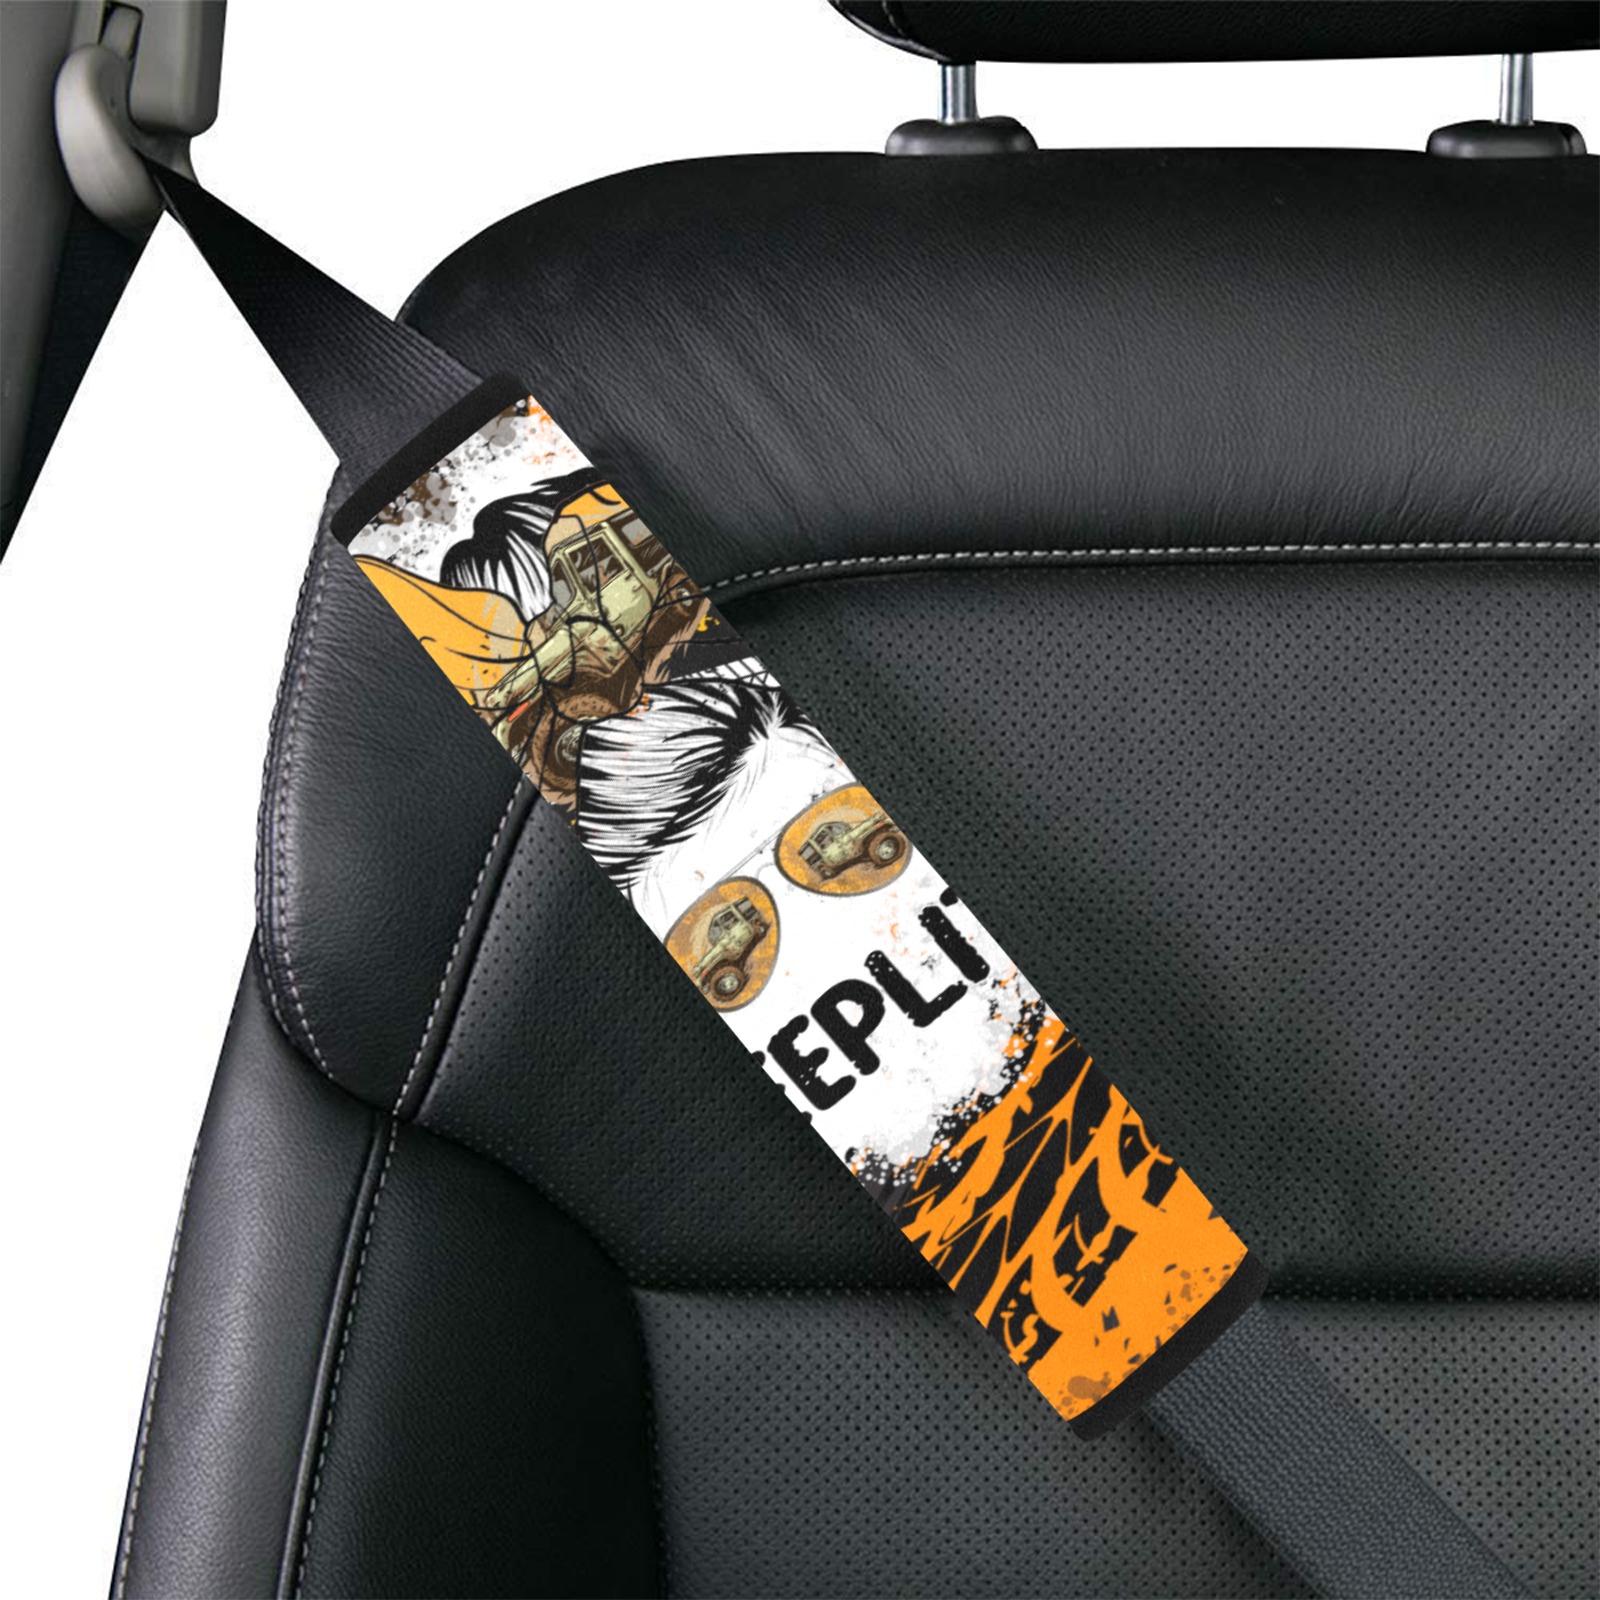 orange JeepLife SeatBeltCover Car Seat Belt Cover 7''x12.6'' (Pack of 2)